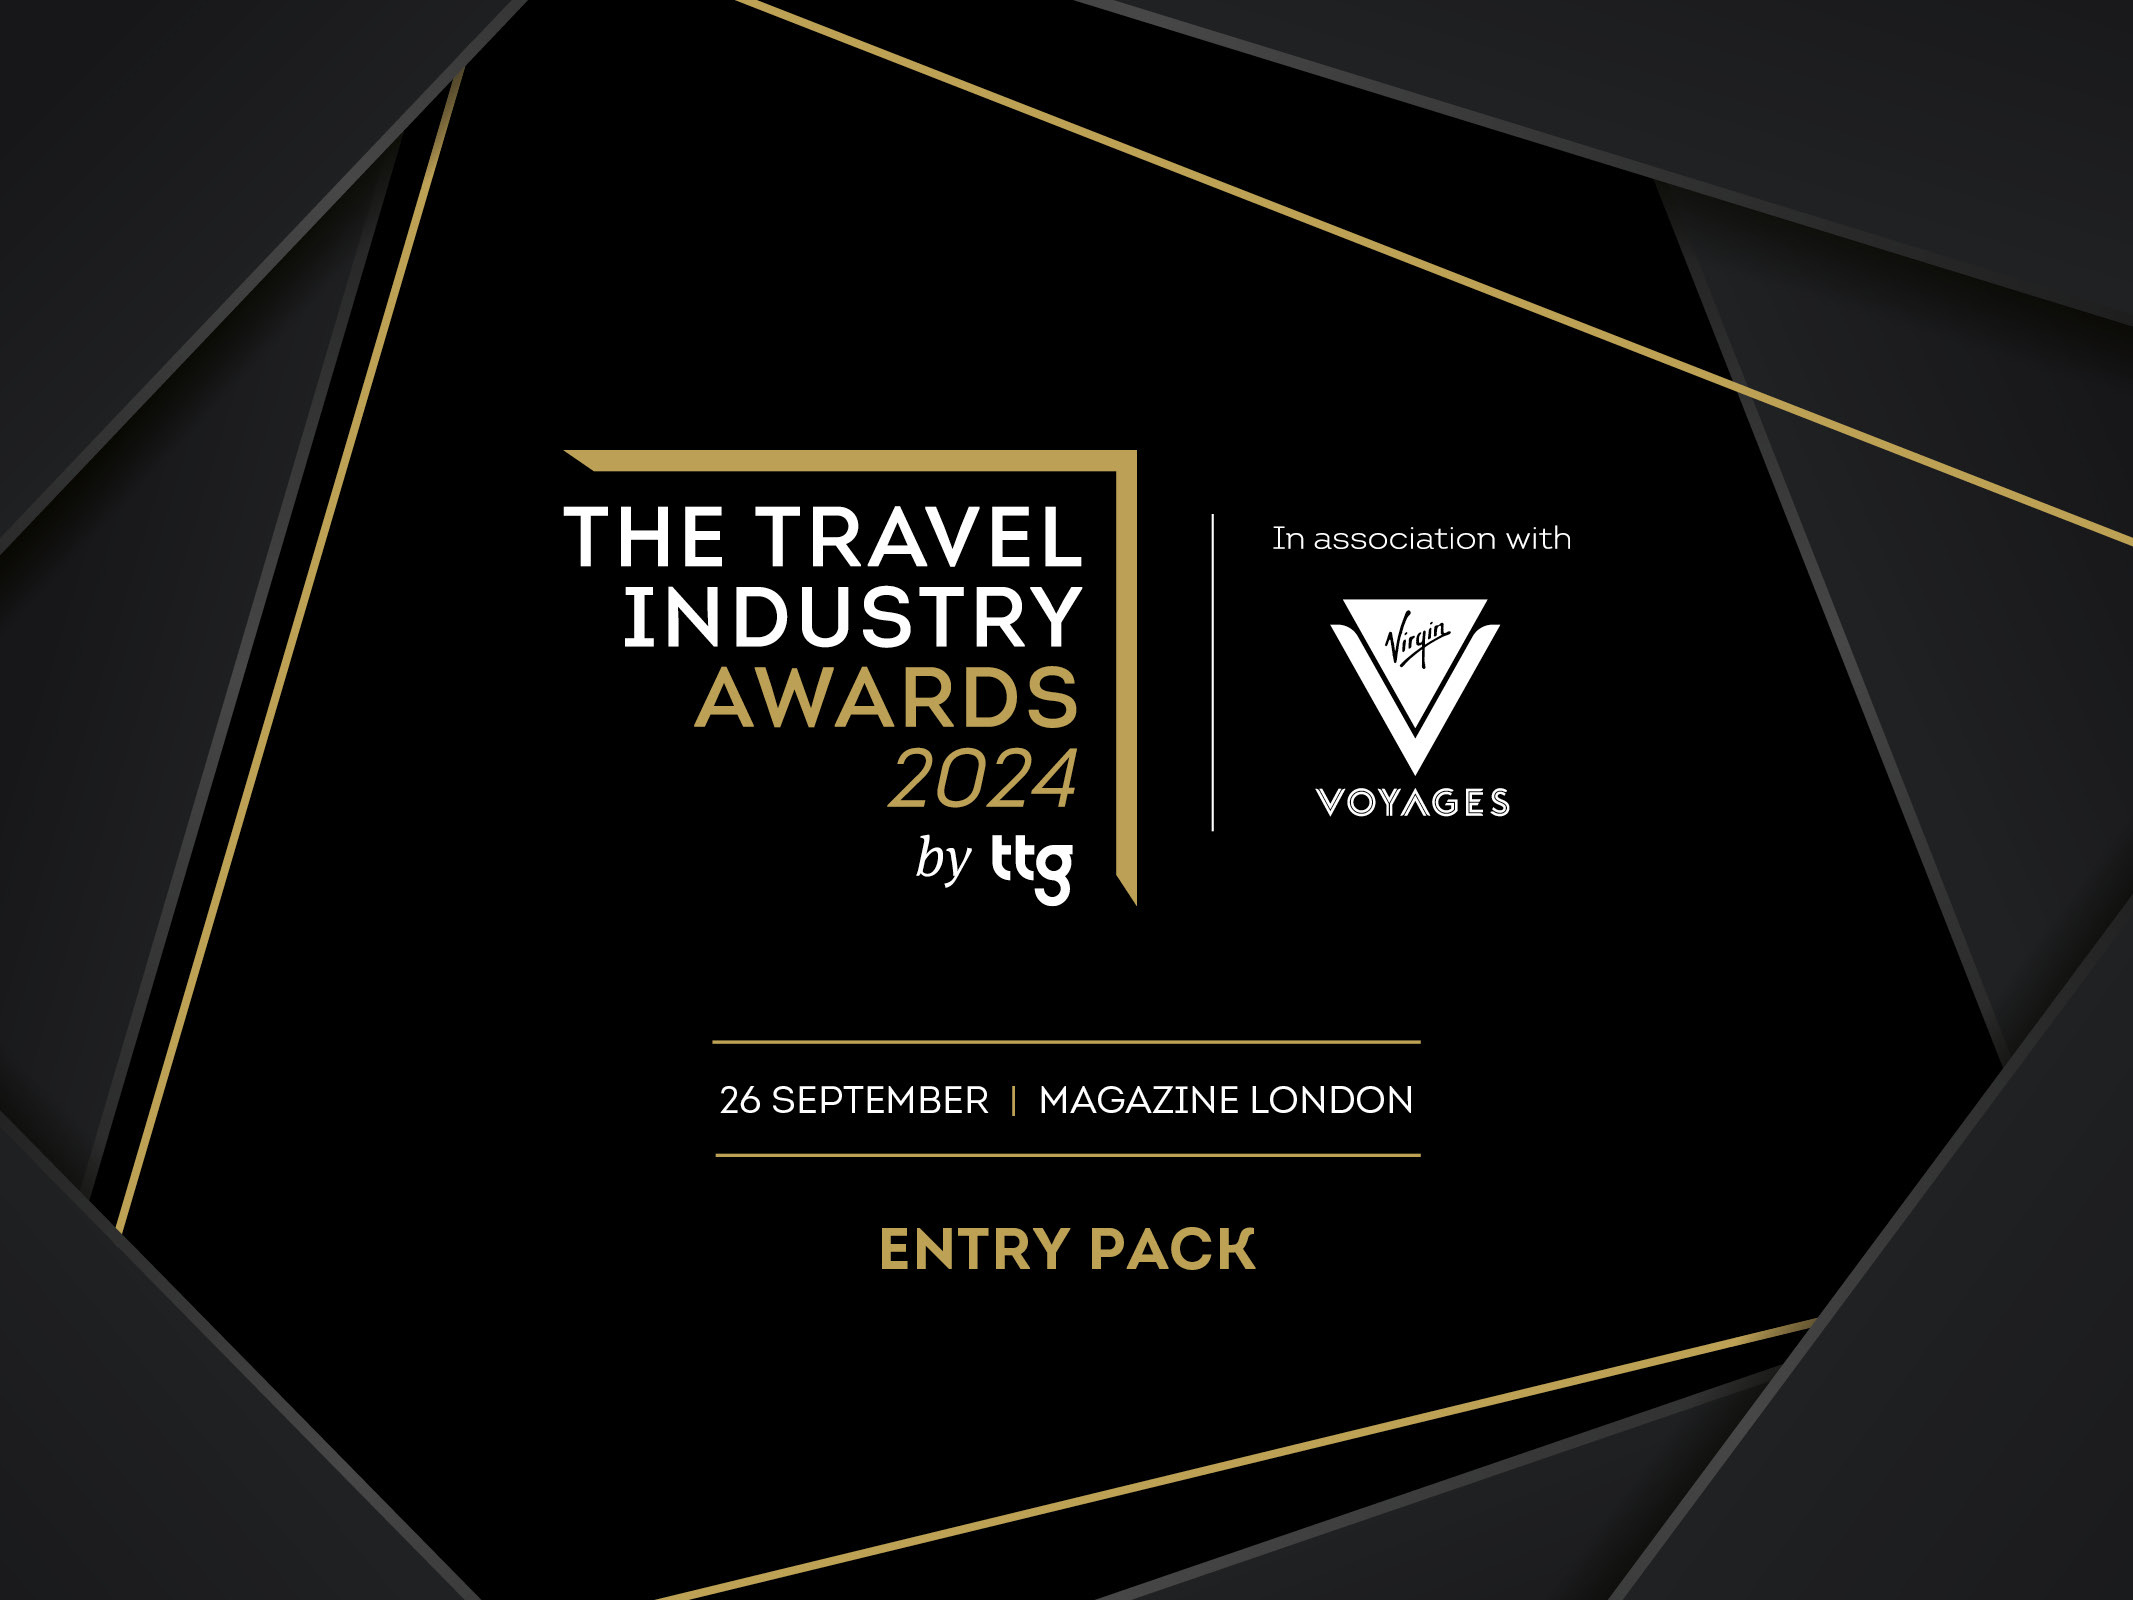 Travel Industry Awards 2024 by TTG entry pack